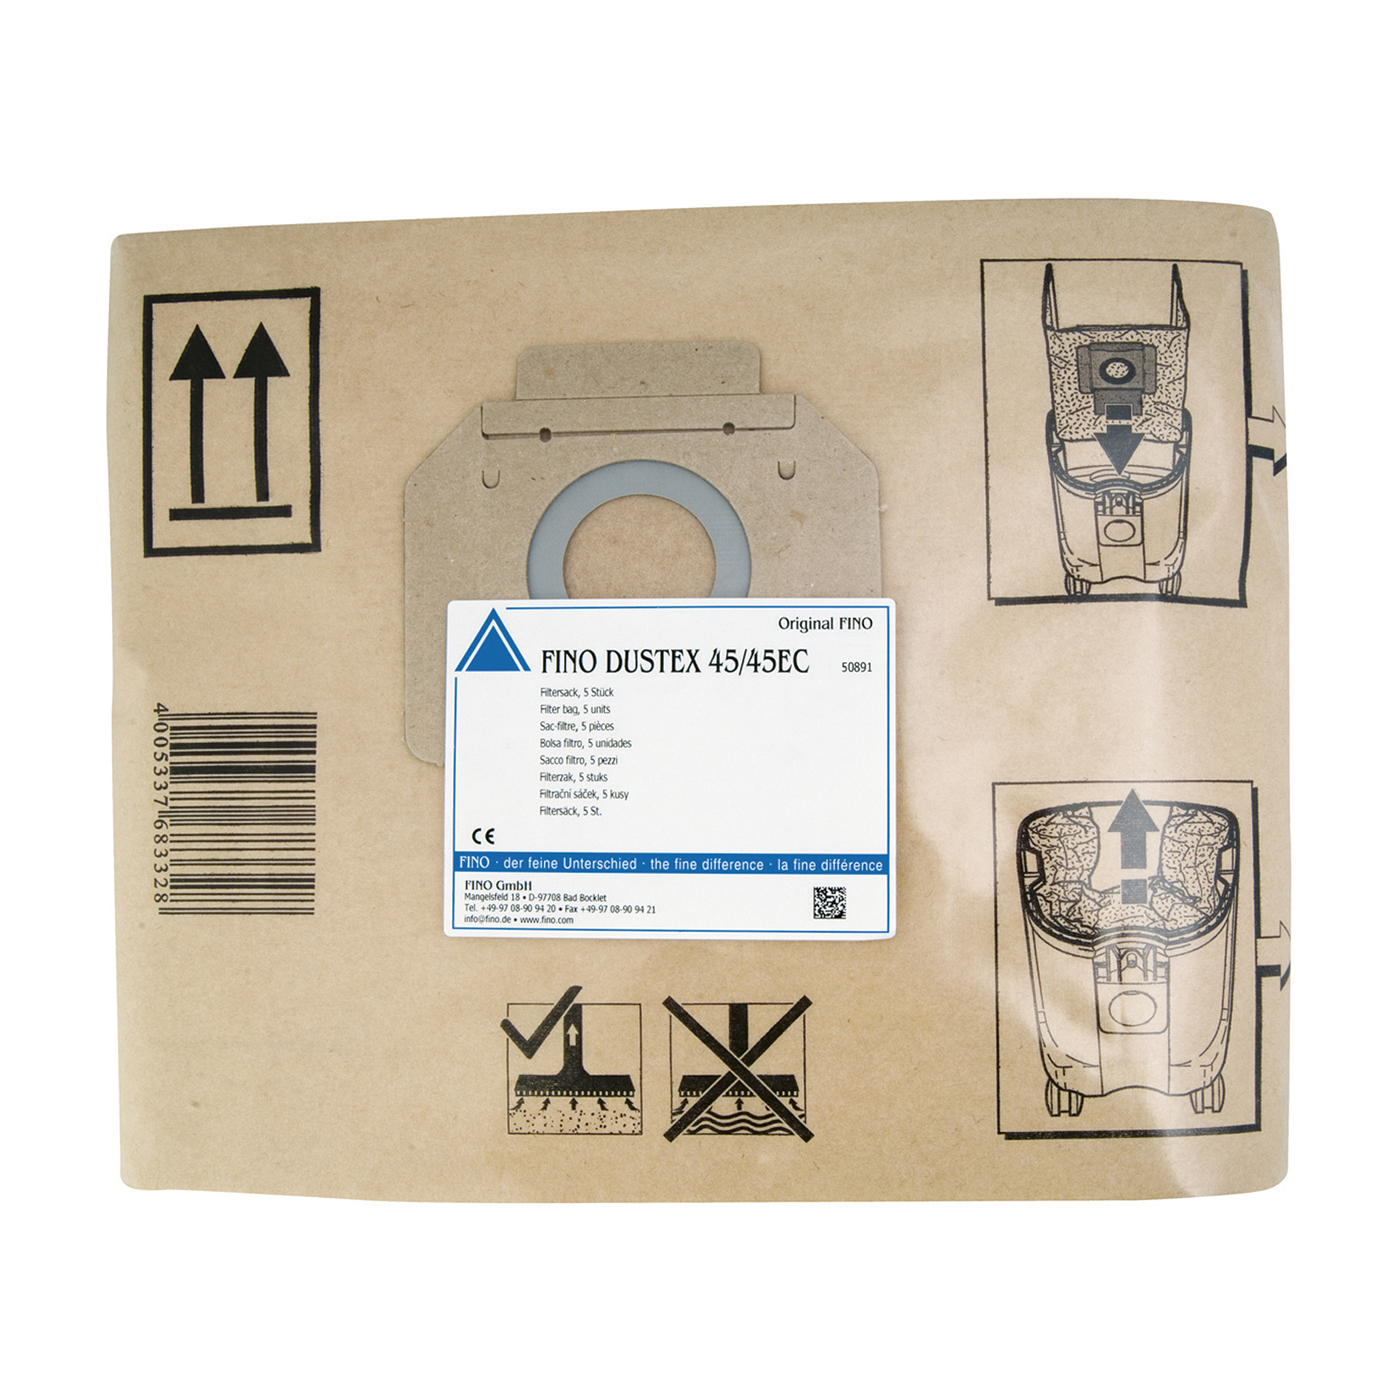 Filter Bags, for FINO DUSTEX 45 - 5 pieces